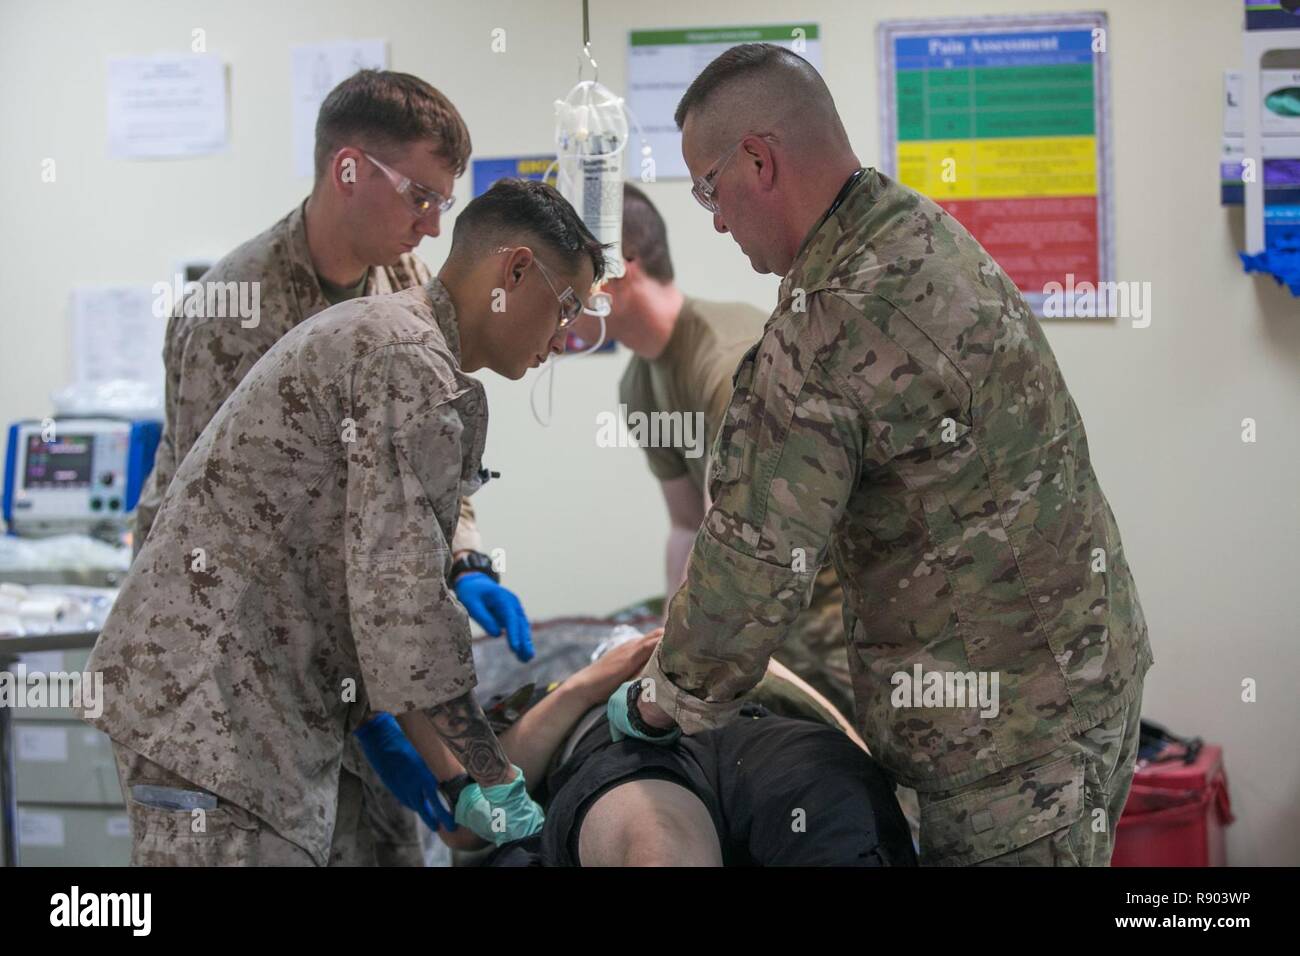 CAMP BEUHRING, Kuwait (Mar. 2, 2017) U.S. Navy Sailors with 11th Marine Expeditionary Unit (MEU) and soldiers with the 31st Combat Support Hospital, 1st Medical Brigade, assess a simulated casualty during a mass casualty drill as part of a sustainment training (SUSTEX) exercise at Camp Beuhring, Kuwait, Mar. 2. During the training, medical participants identified physical and mental trauma to arrange patient care into categories based on severity of injuries sustained. Through the training conducted at SUSTEX, Marines and Sailors with the 11th MEU remain postured to respond to emerging crises, Stock Photo